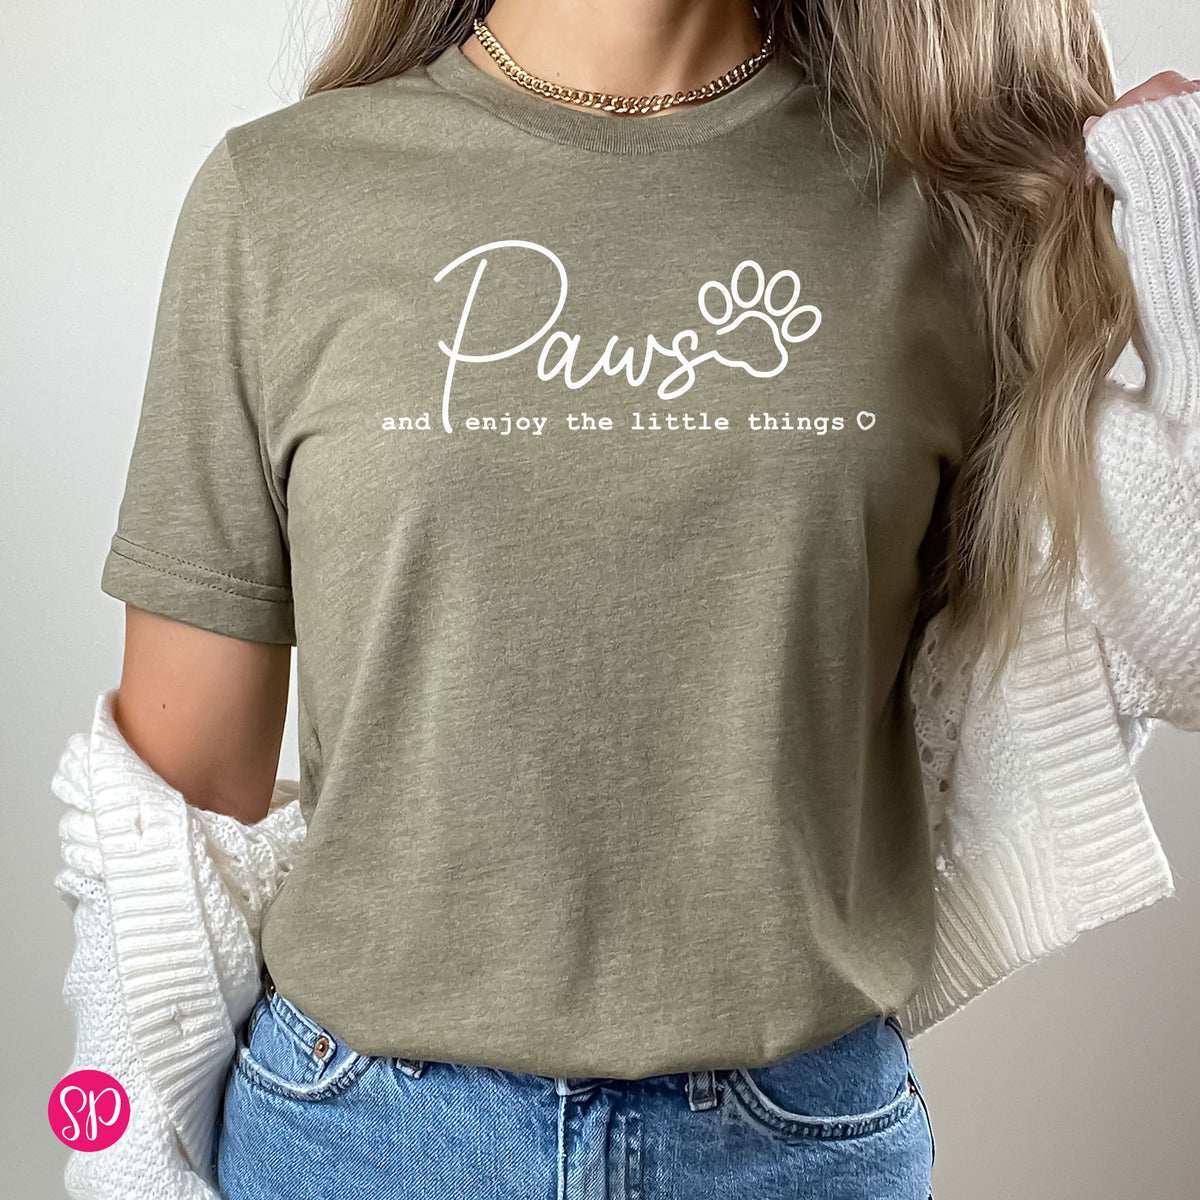 Paws and Enjoy the Little Things Unisex T-Shirt